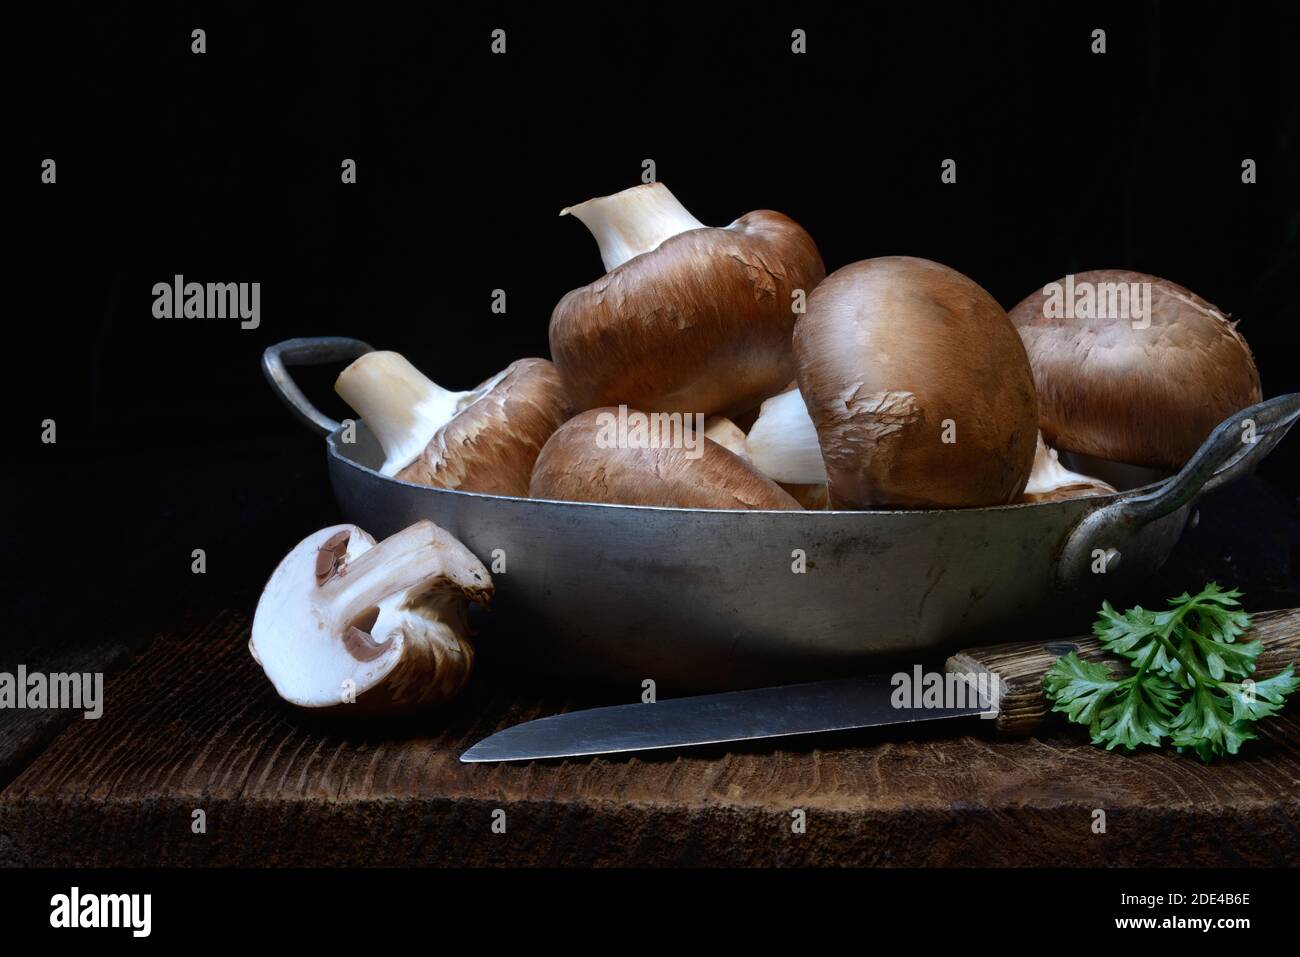 Brown cultivated mushrooms in shell with knife, Germany Stock Photo